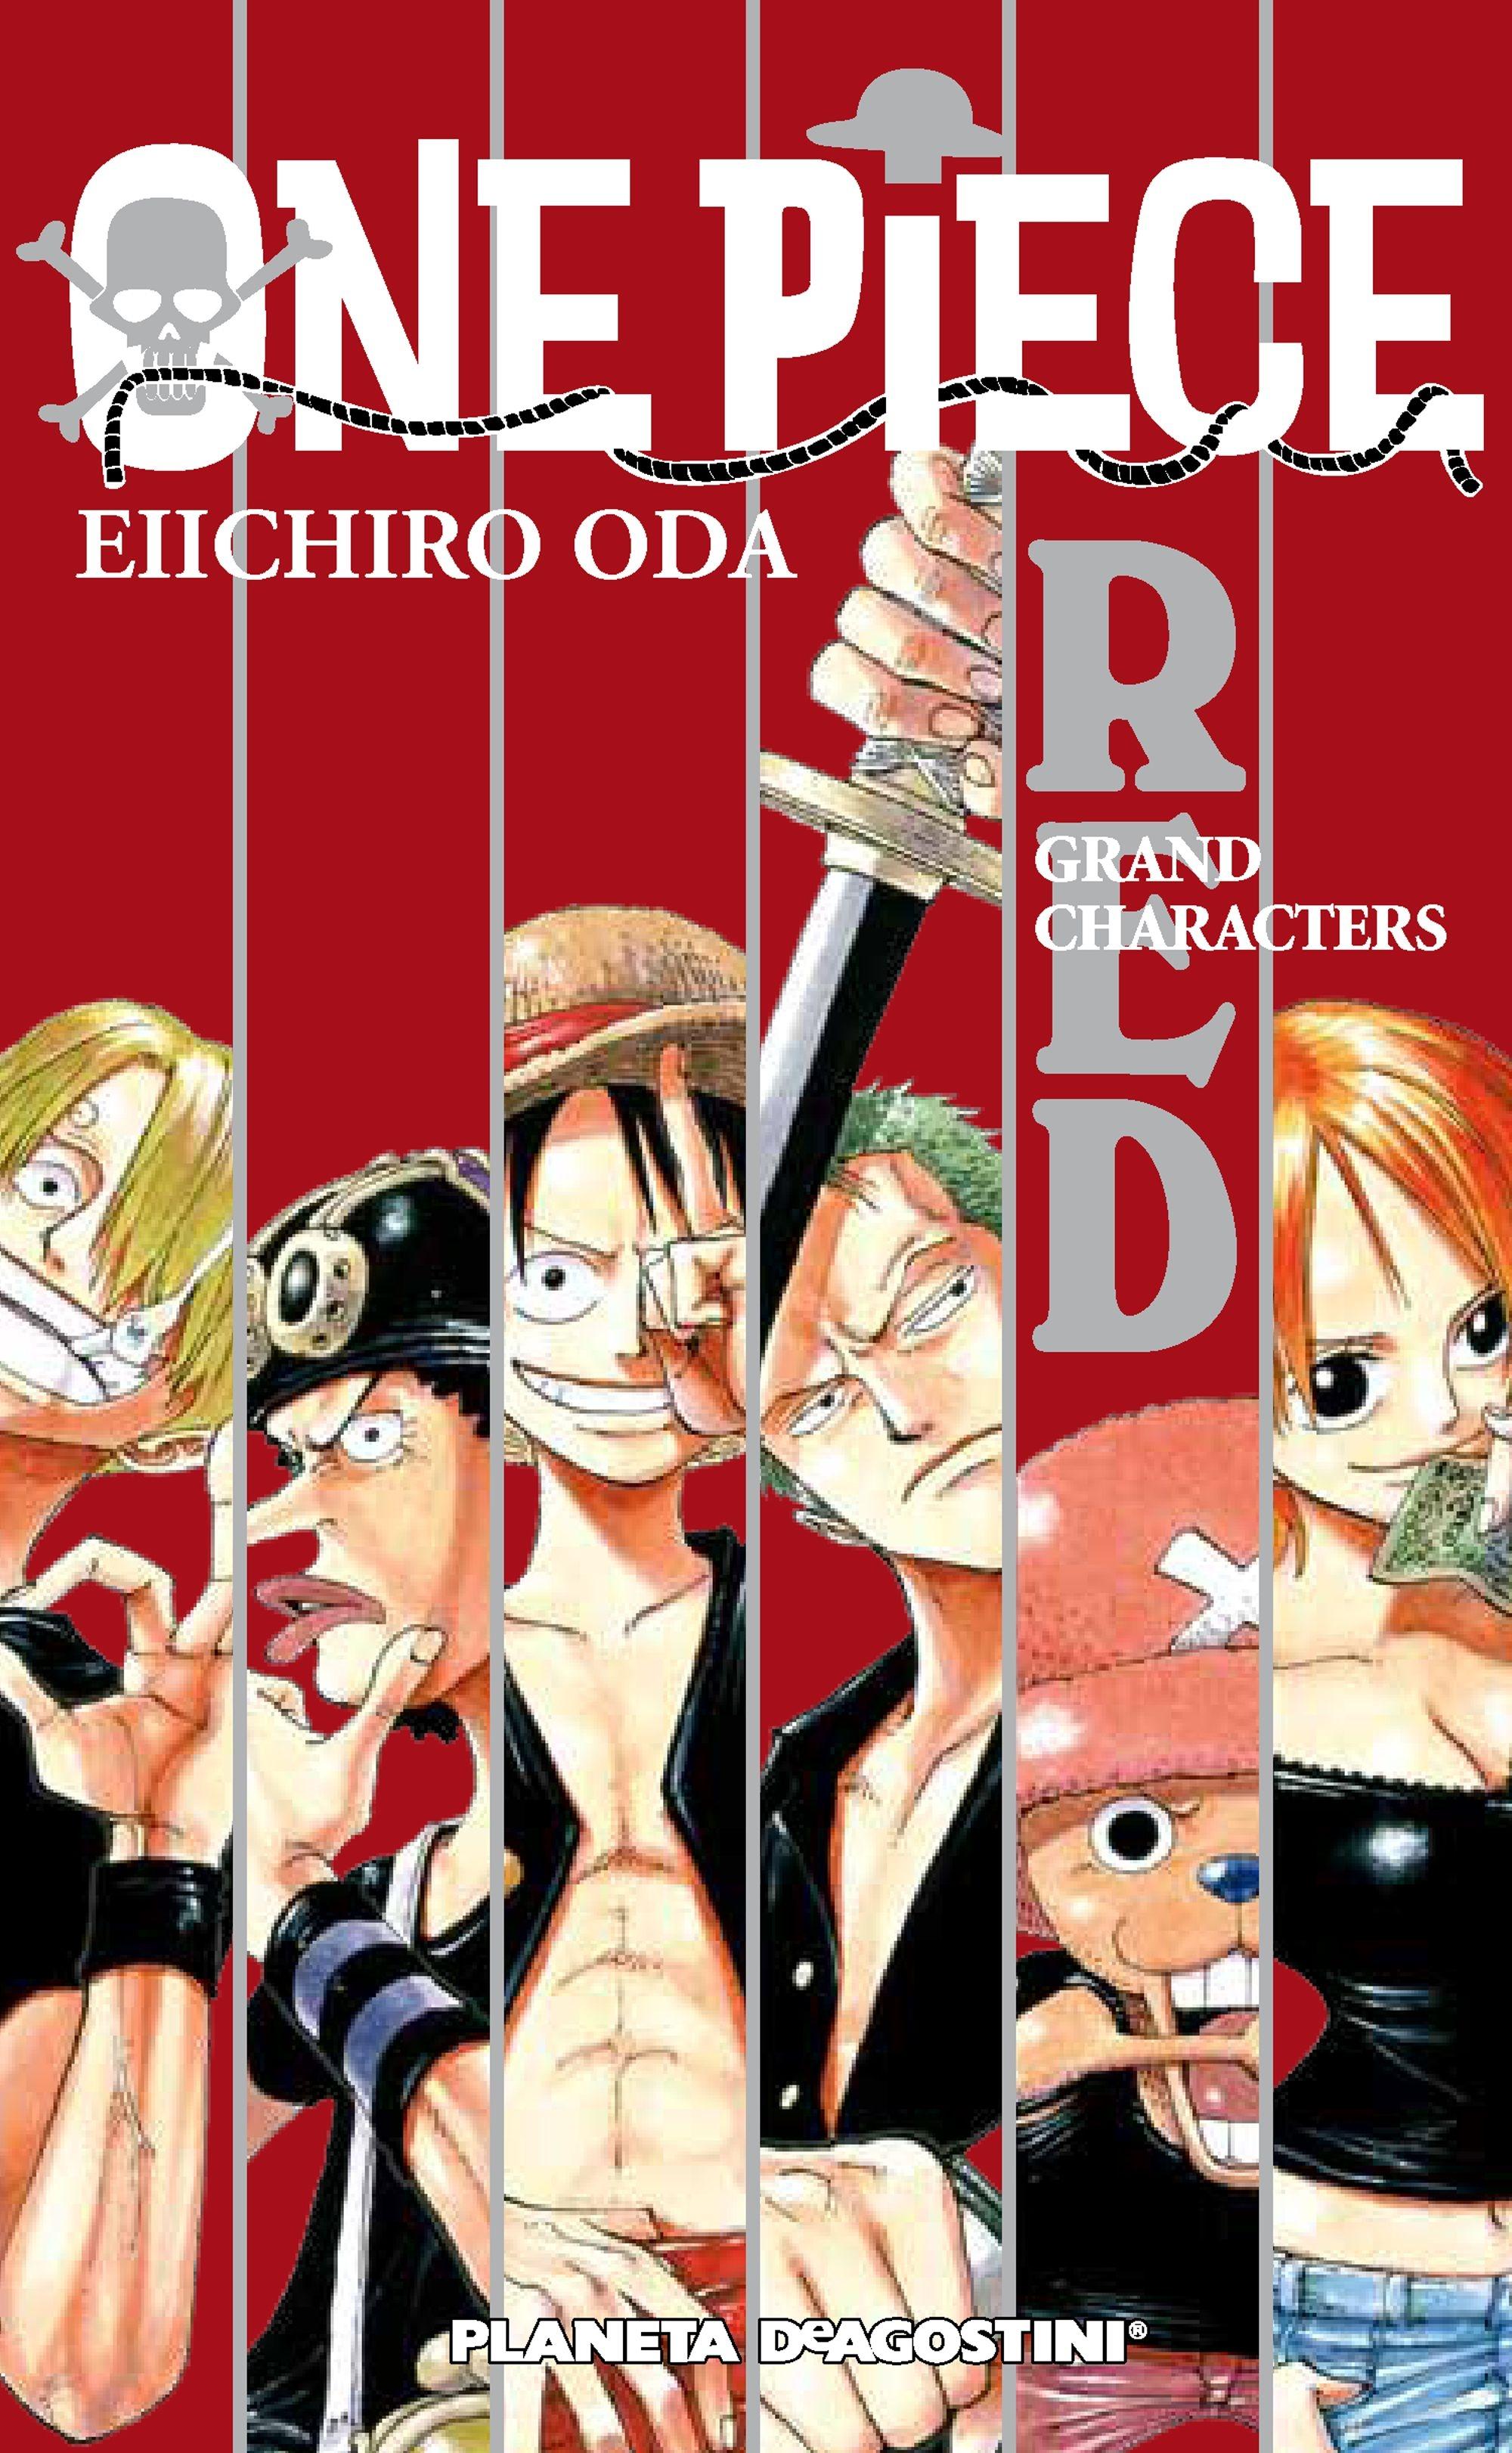 One Piece Guía Nº 01 Red "Gran Characters"